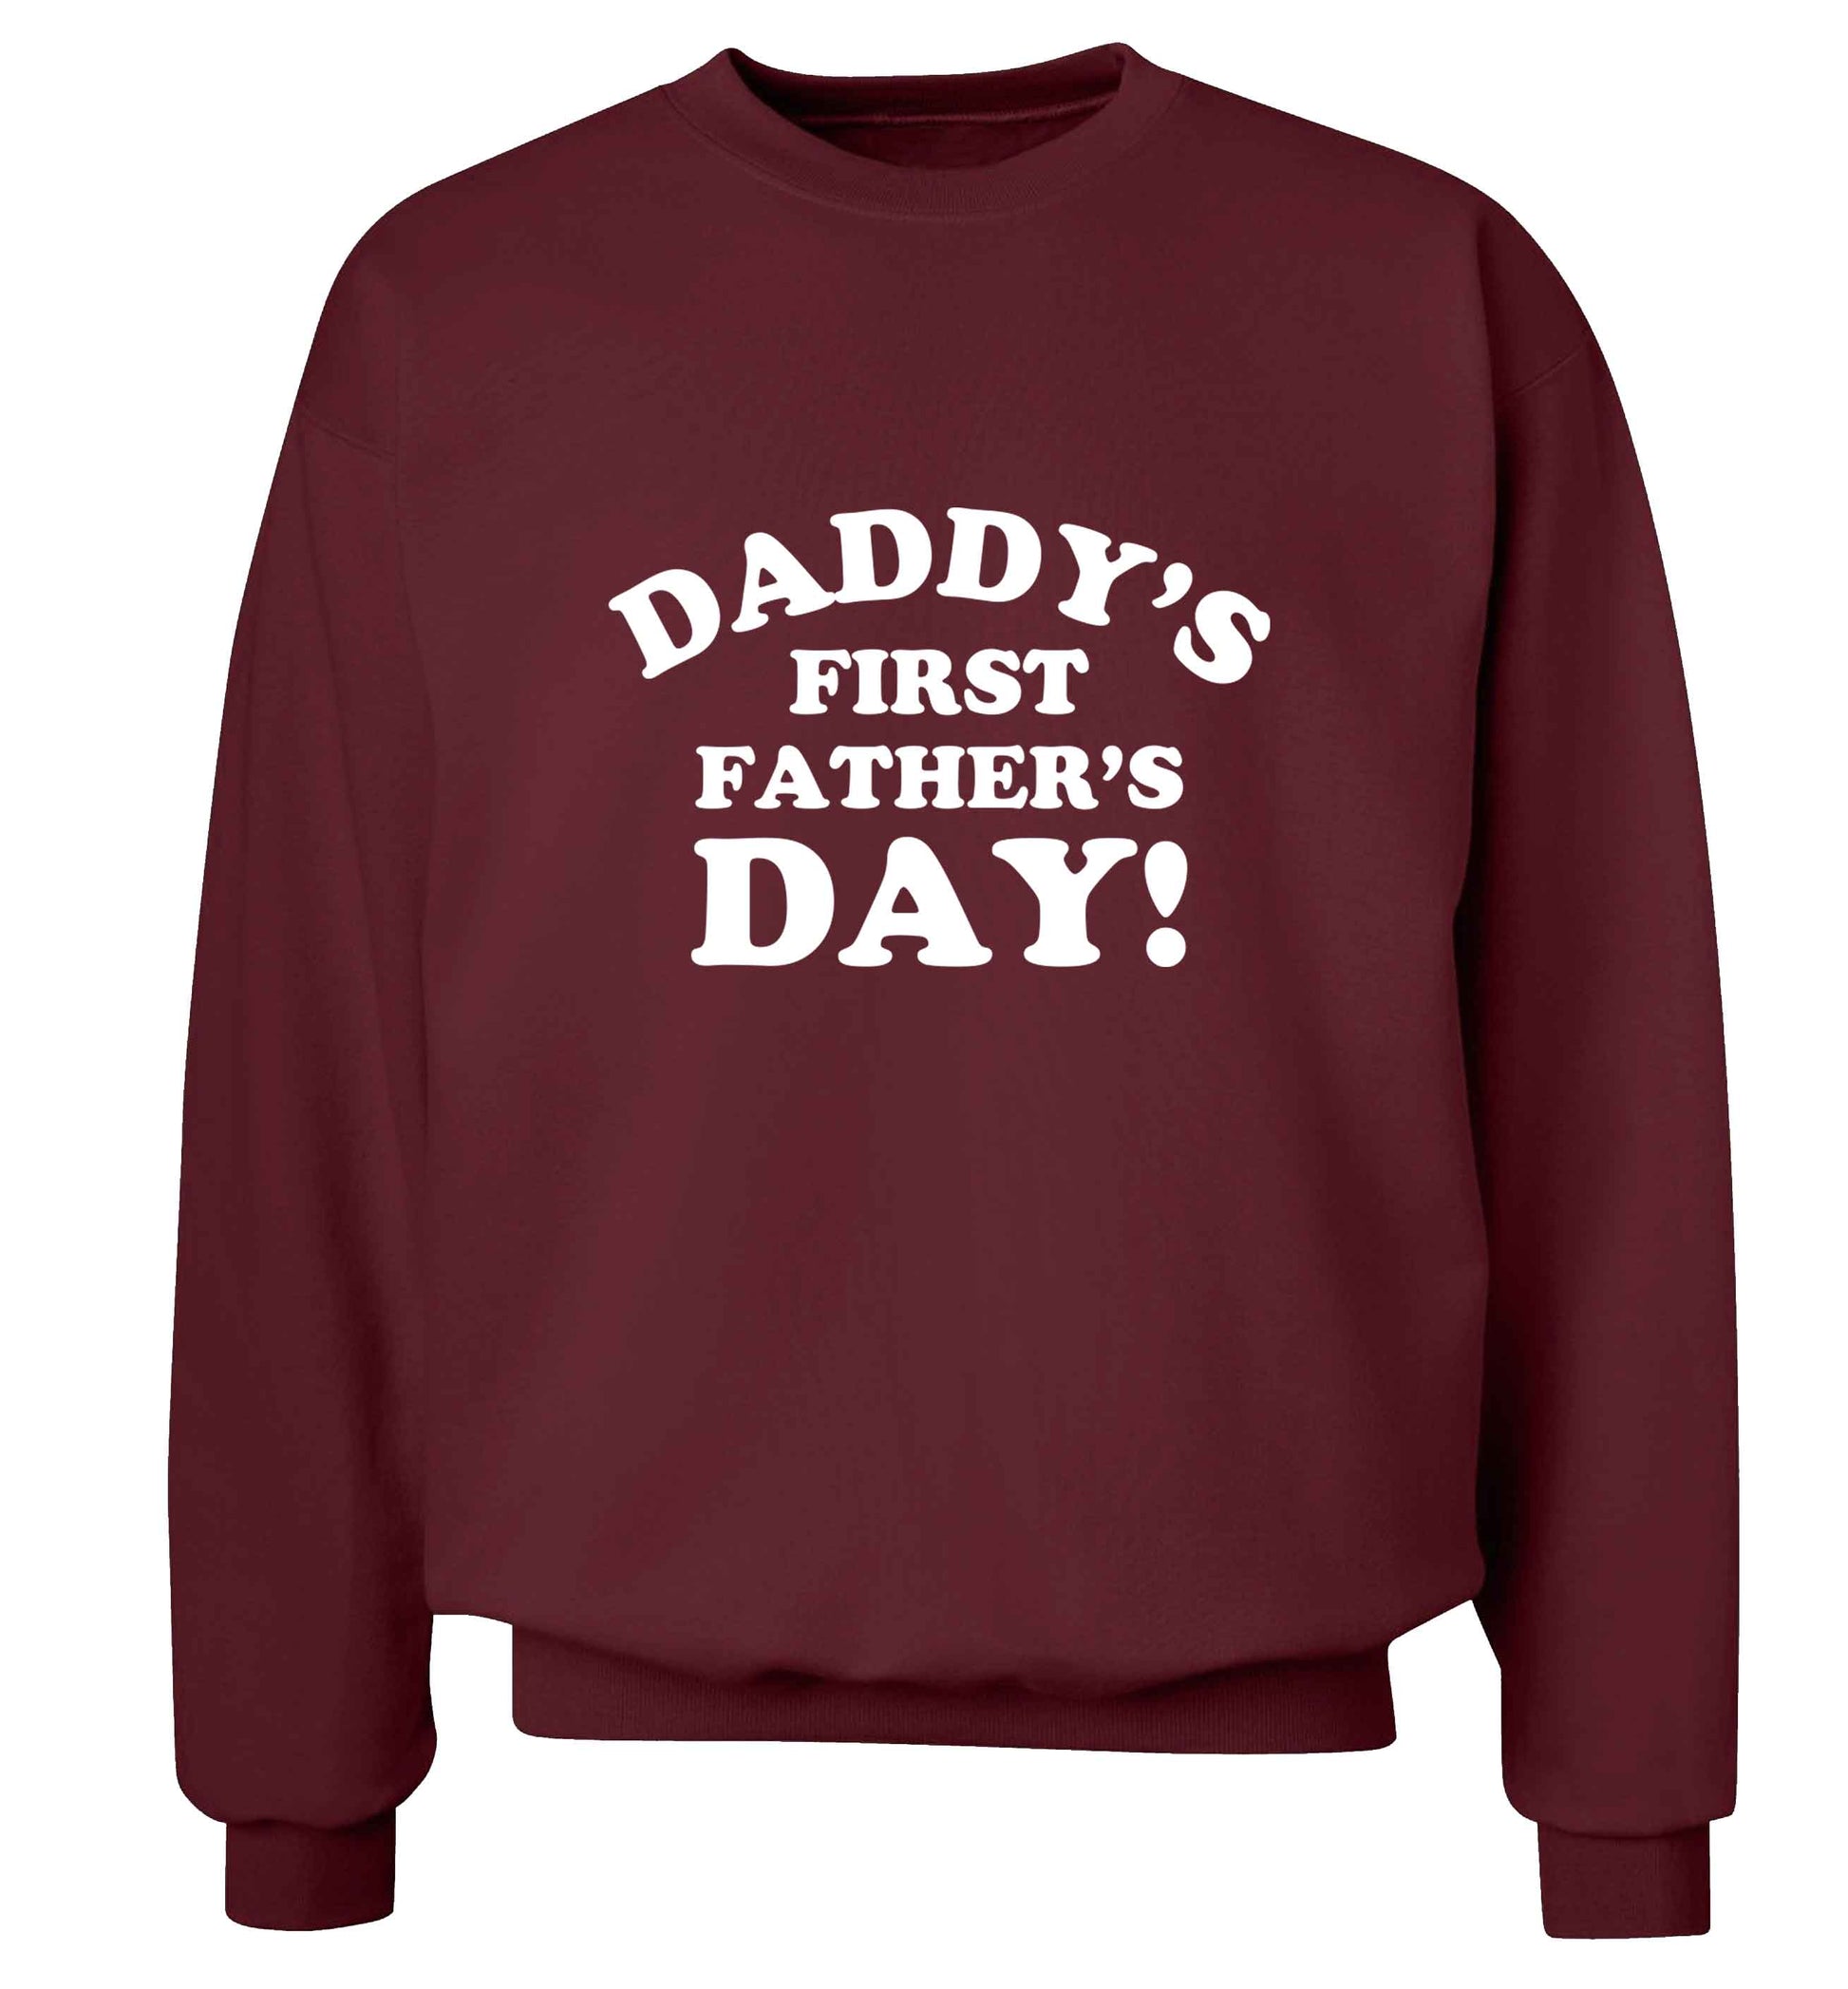 Daddy's first father's day adult's unisex maroon sweater 2XL